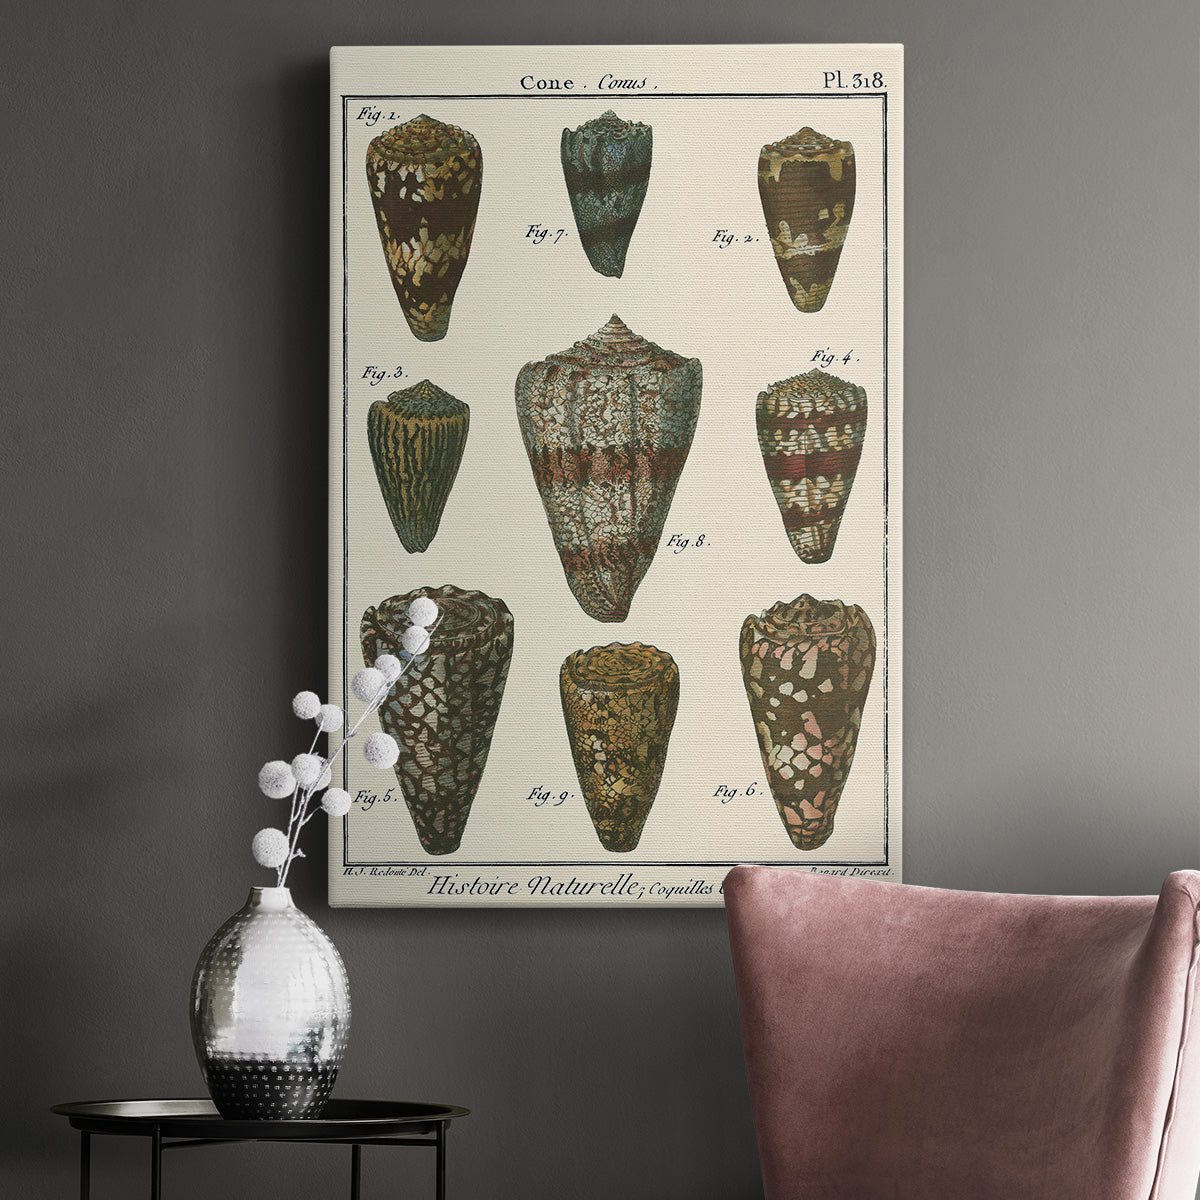 Cone Shell pl. 318 Premium Gallery Wrapped Canvas - Ready to Hang